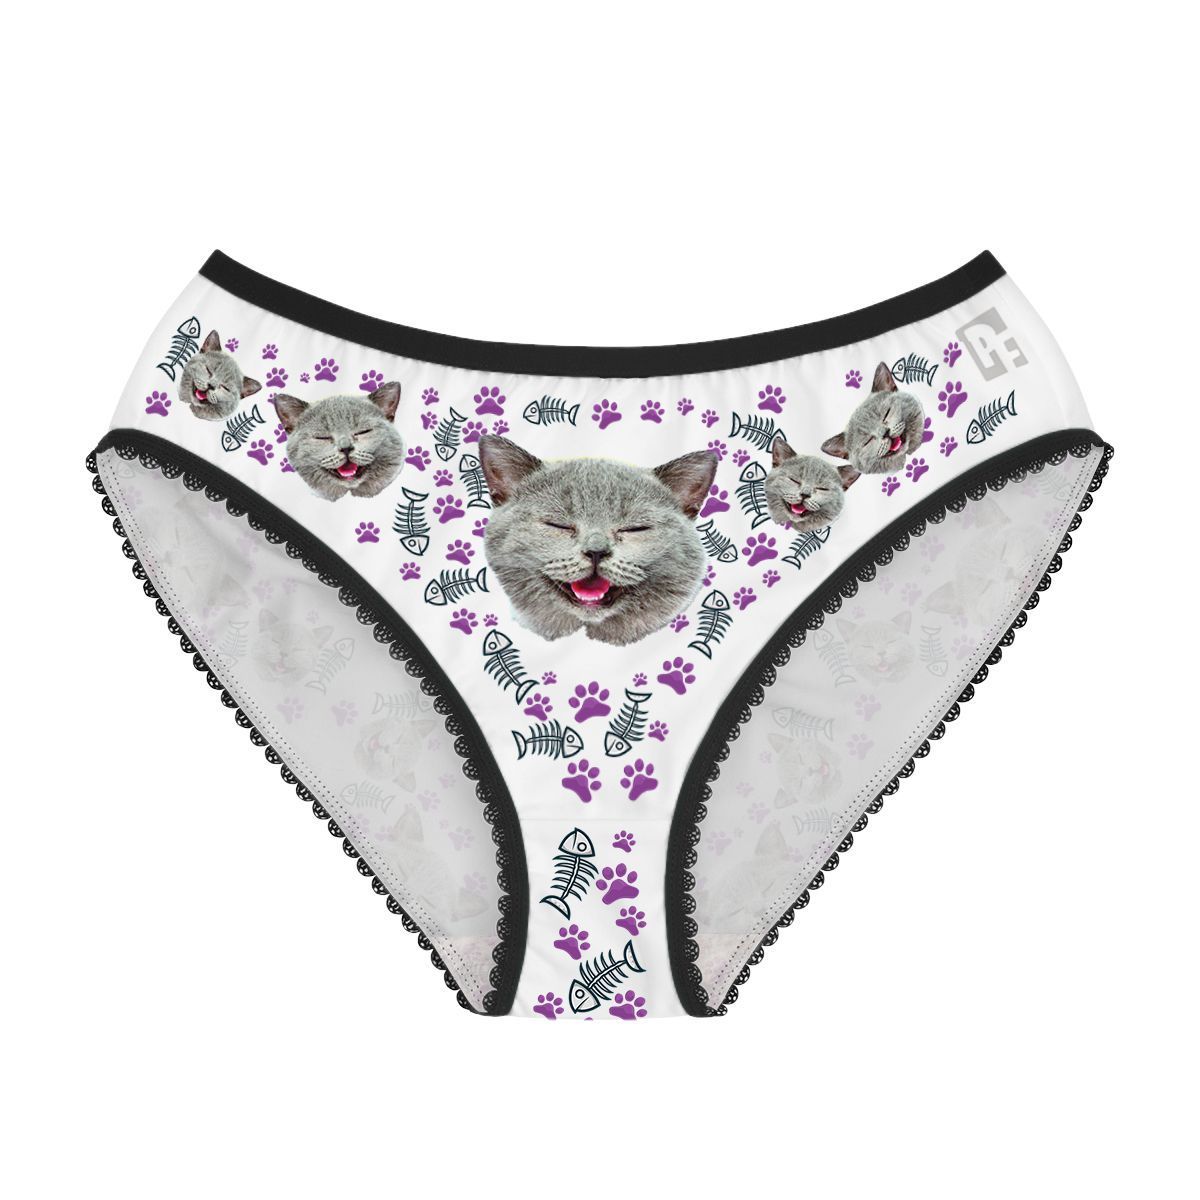 White Cat women's underwear briefs personalized with photo printed on them